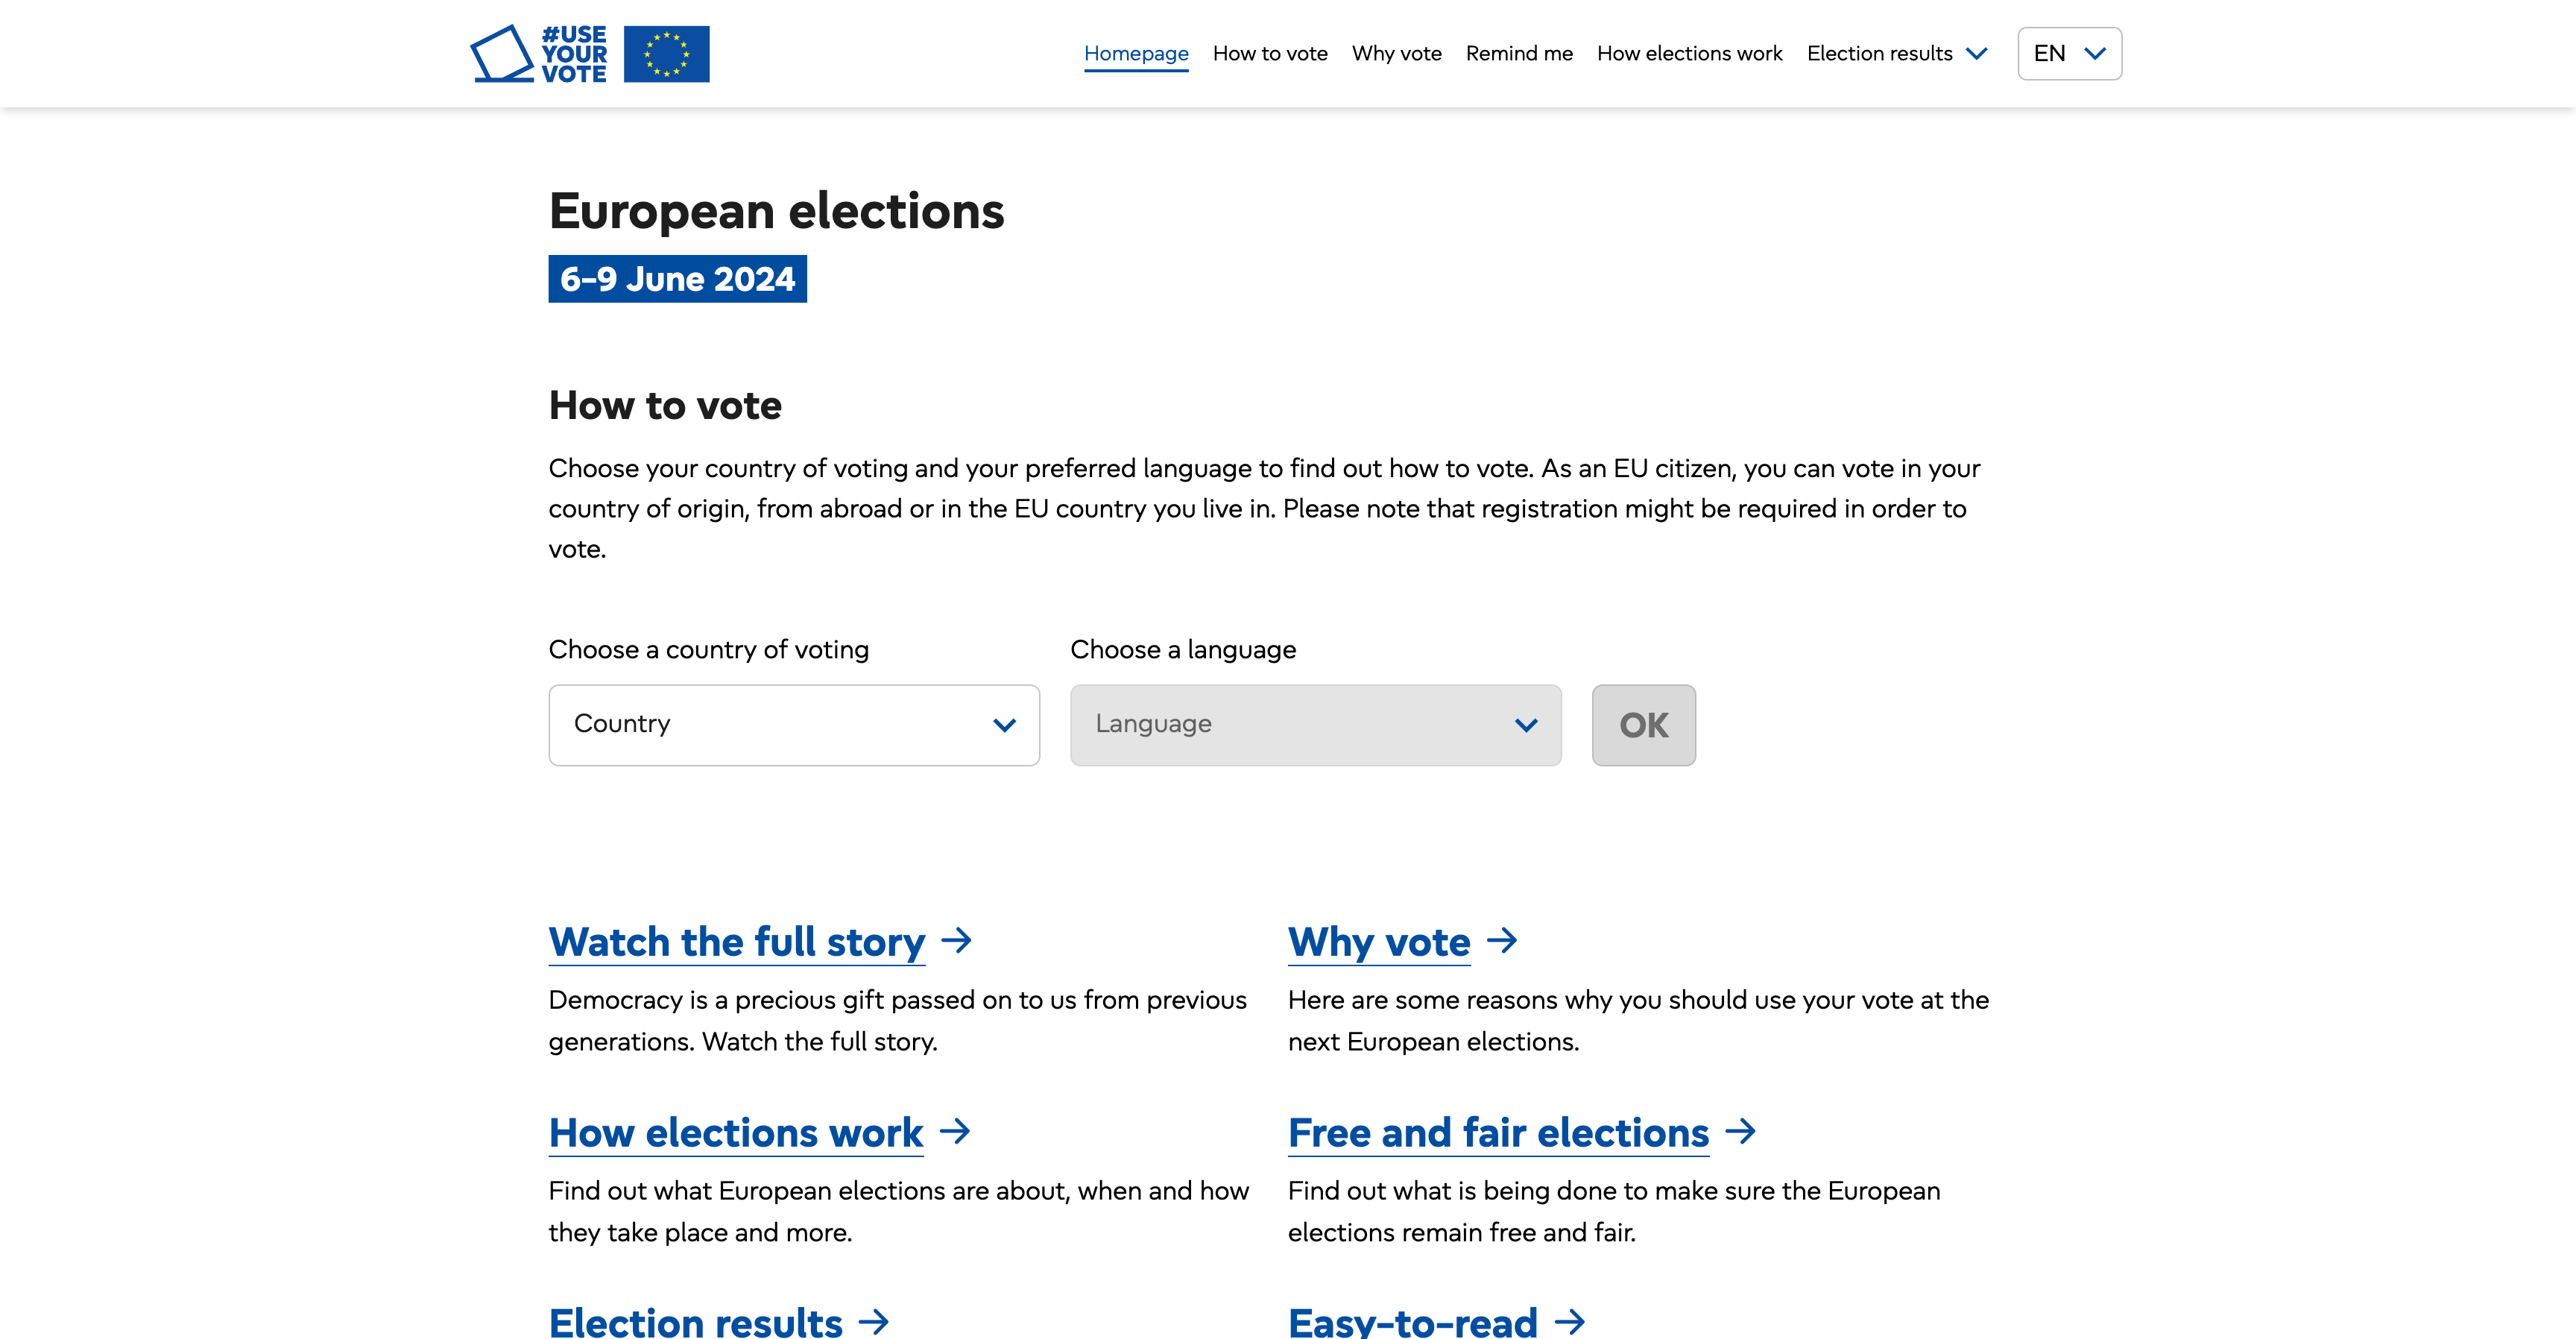 Information about European elections